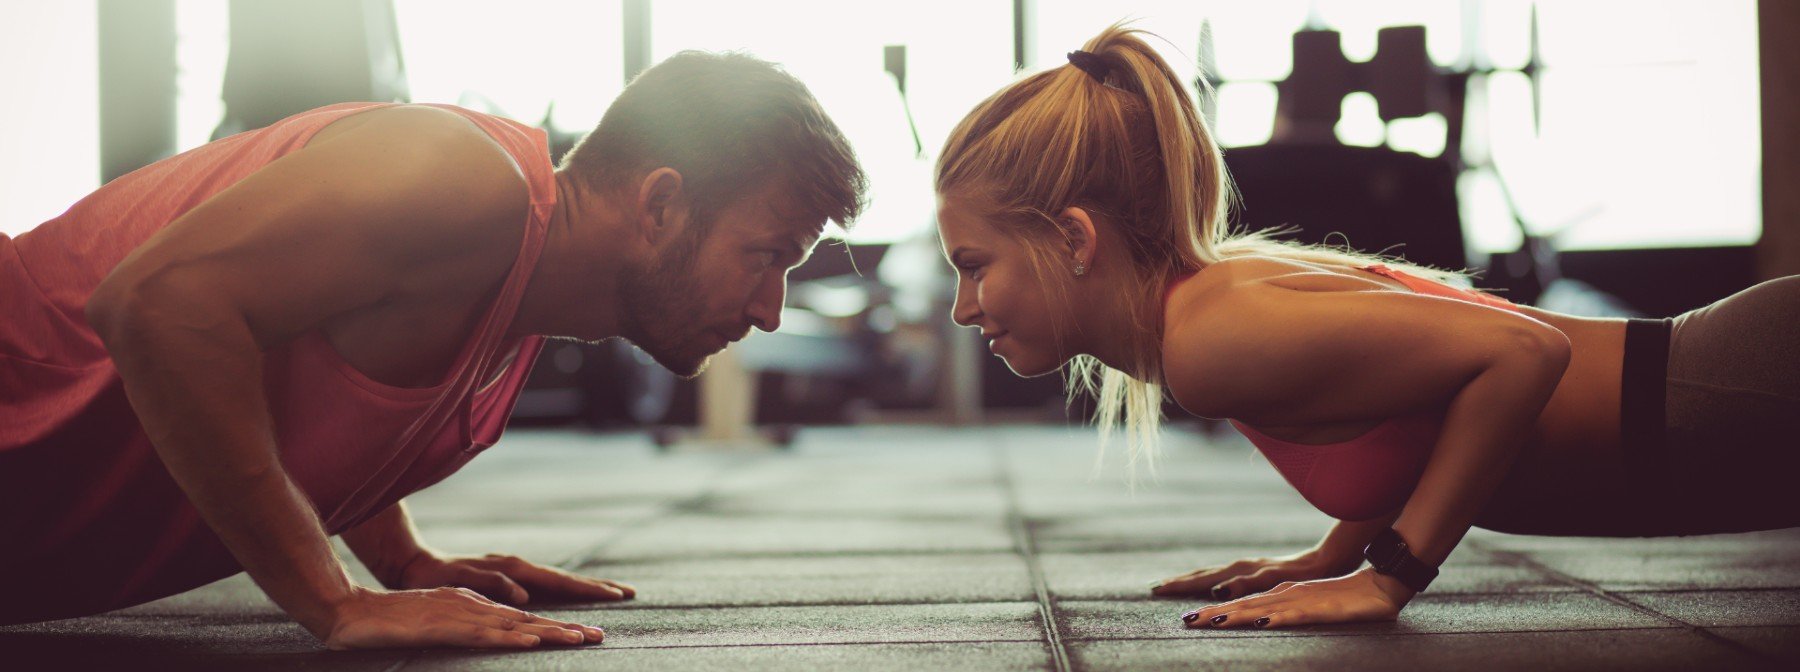 Could You Complete These Couples Home Workouts?